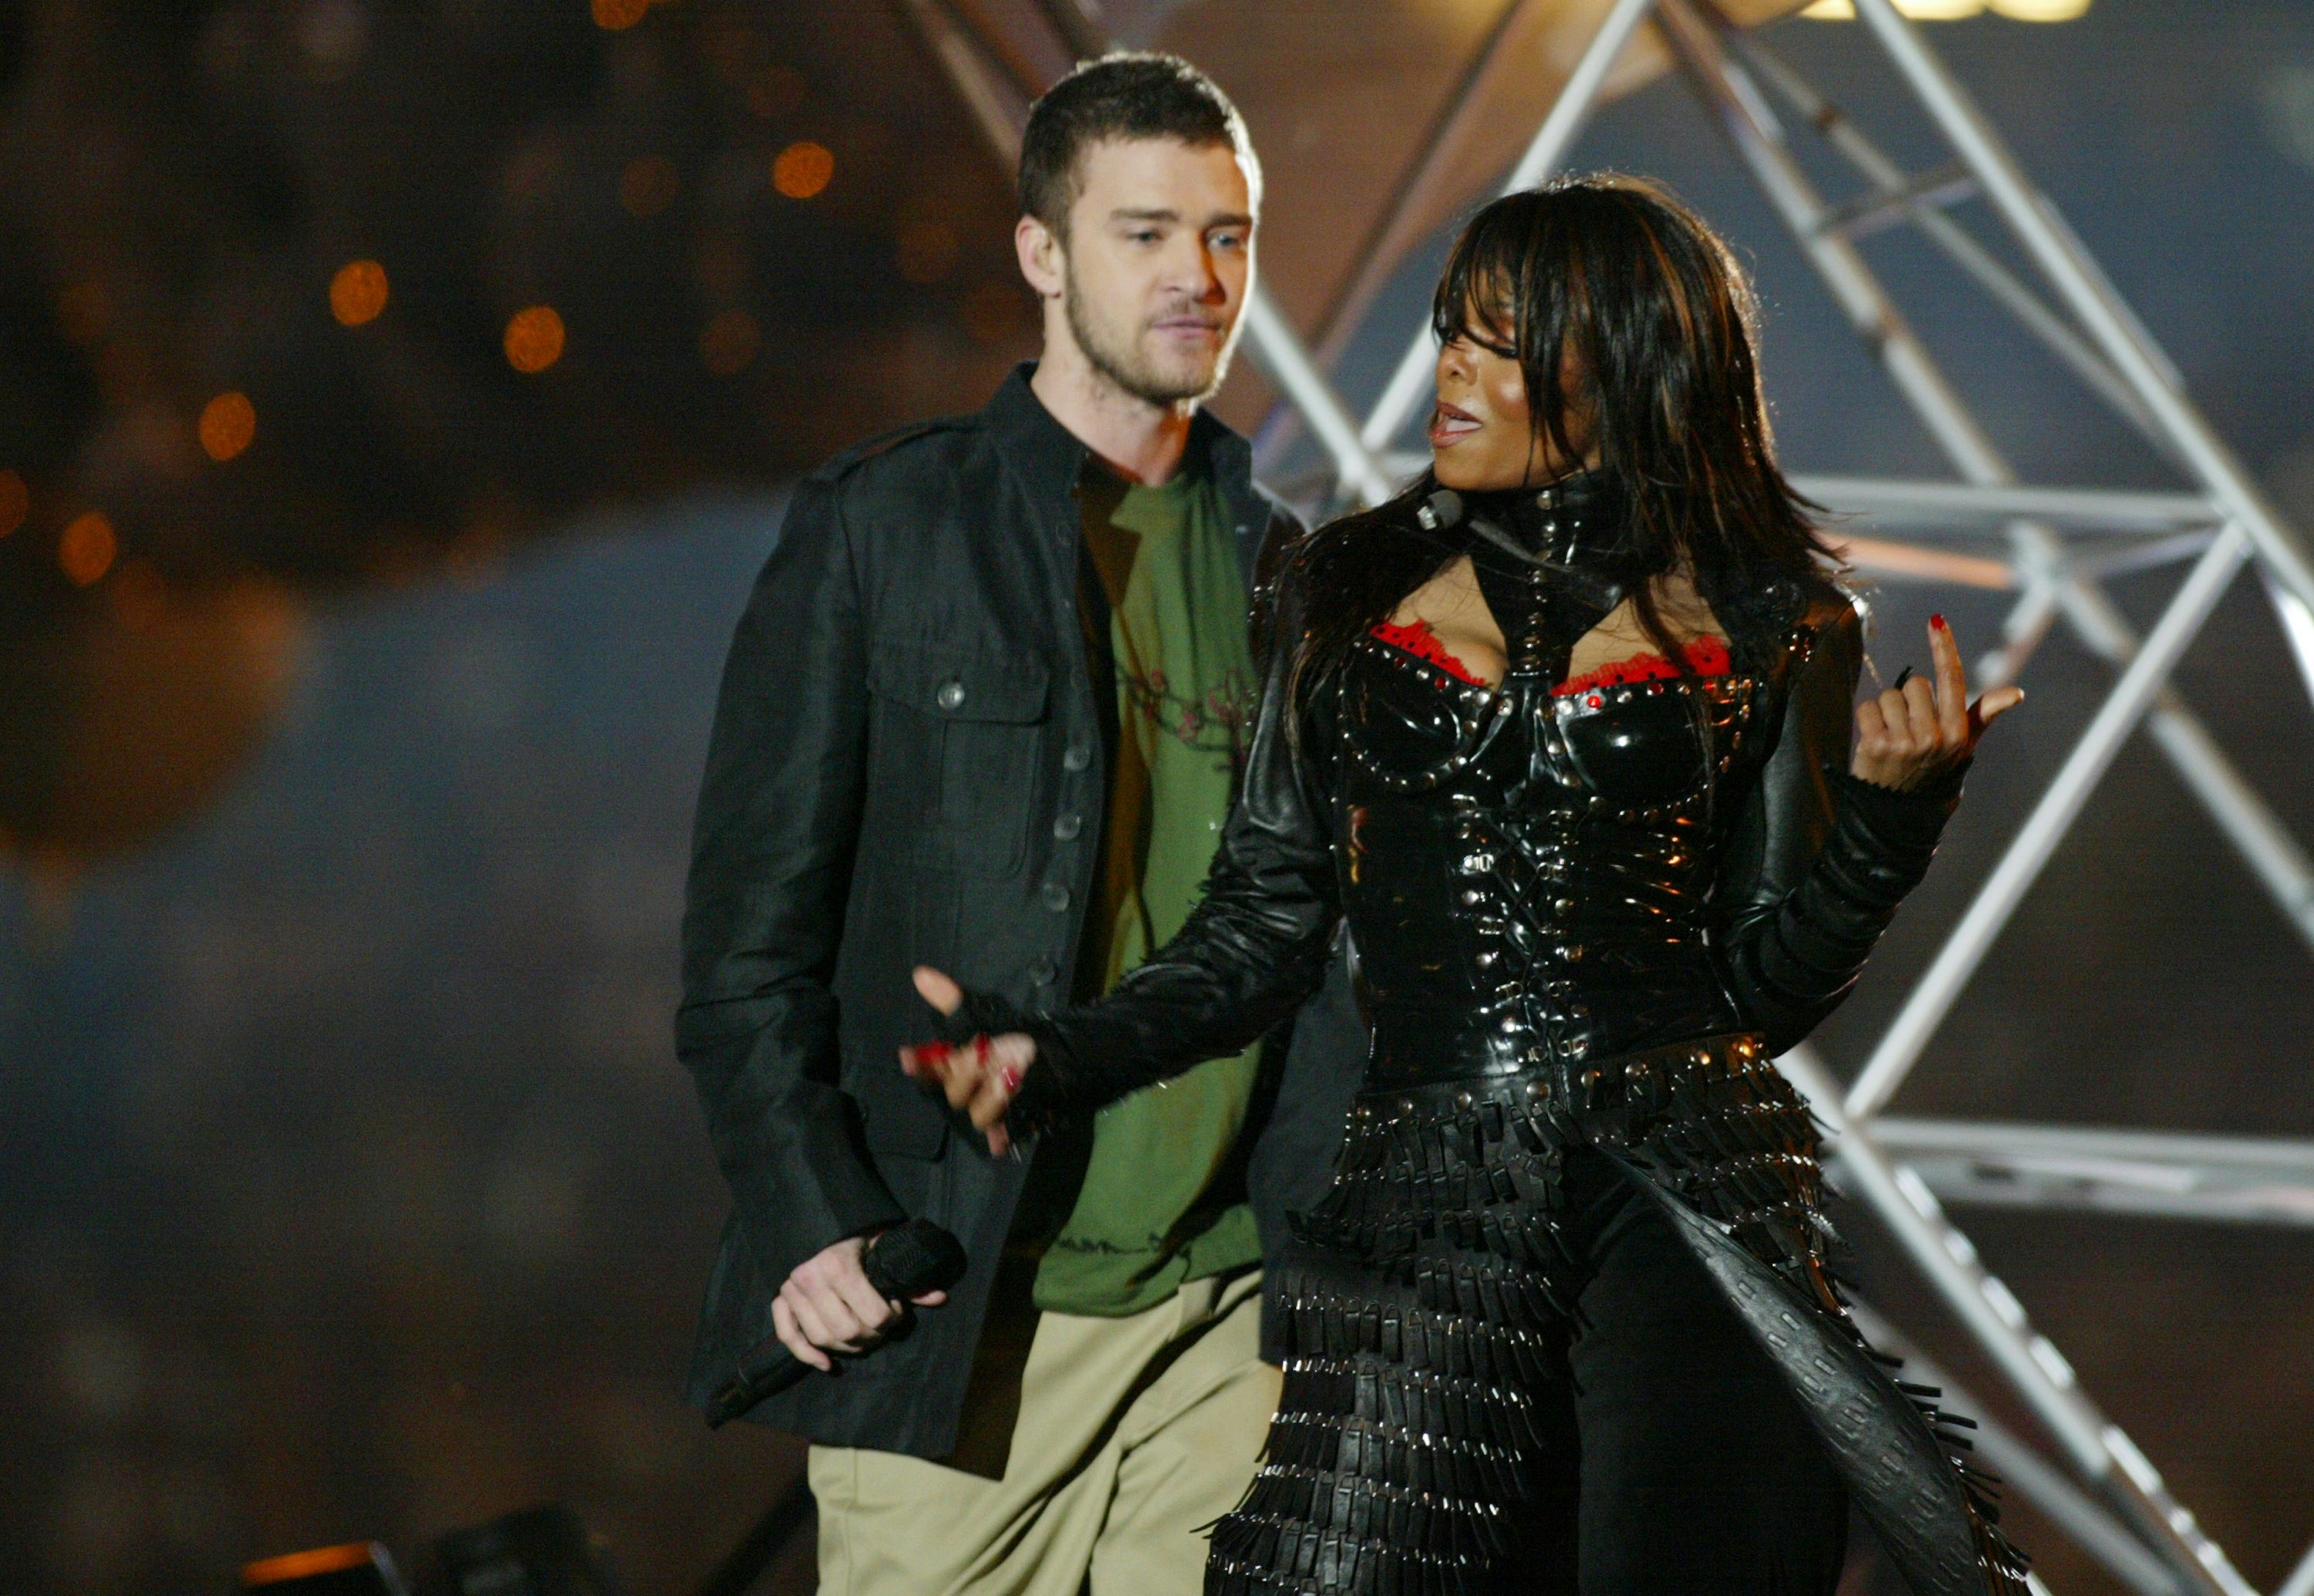 This Is The Story Behind Janet Jackson's Super Bowl 'Wardrobe Malfunction